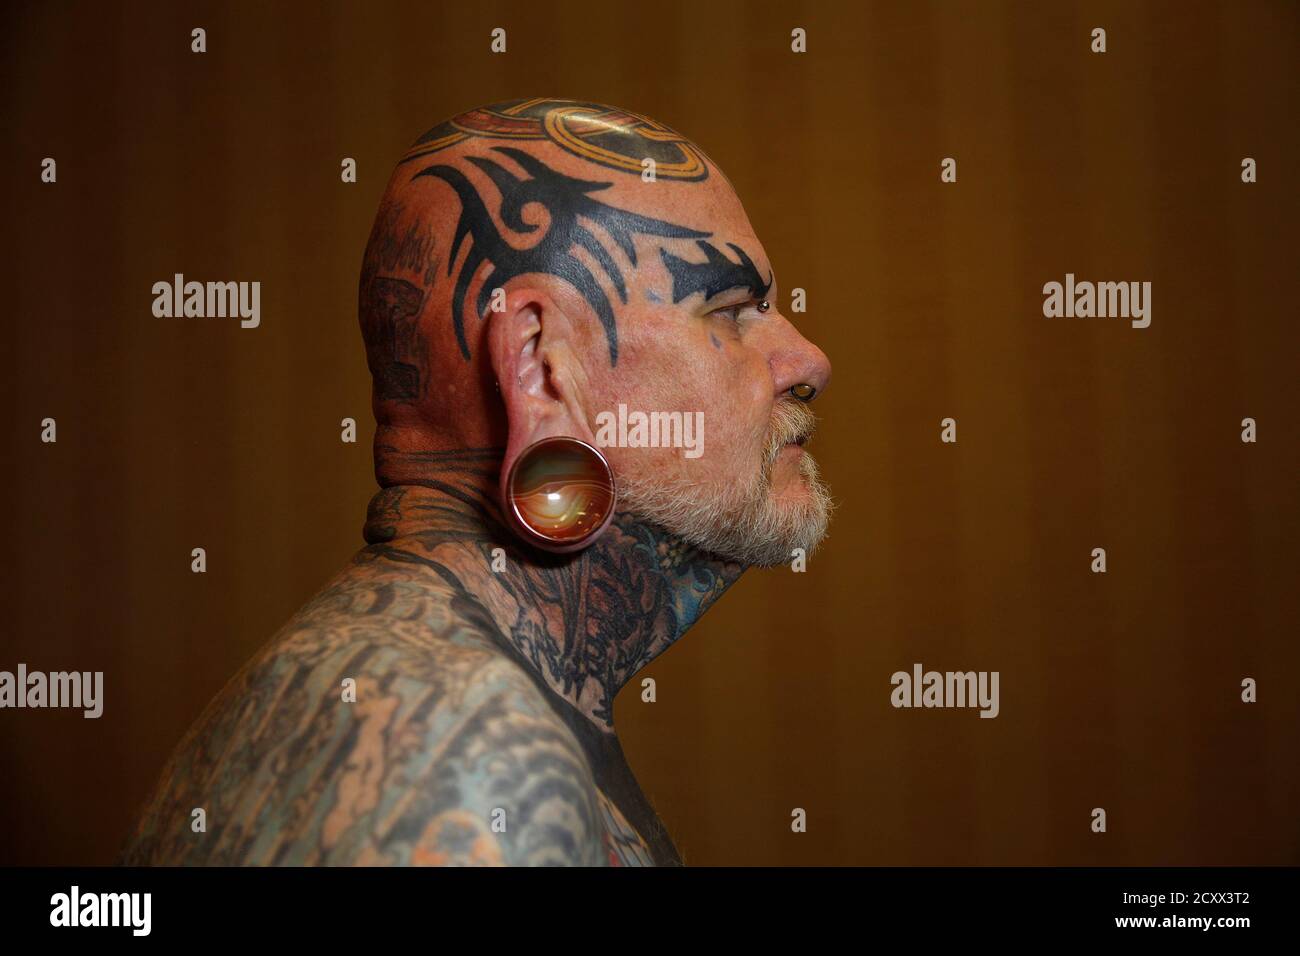 Robert Seibert, 62, from Burlington, Kentucky, shows off his full body of  tattoos, including the tribal-inspired designs he has accumulated over 40  years, during the National Tattoo Association Convention in Cincinnati, Ohio